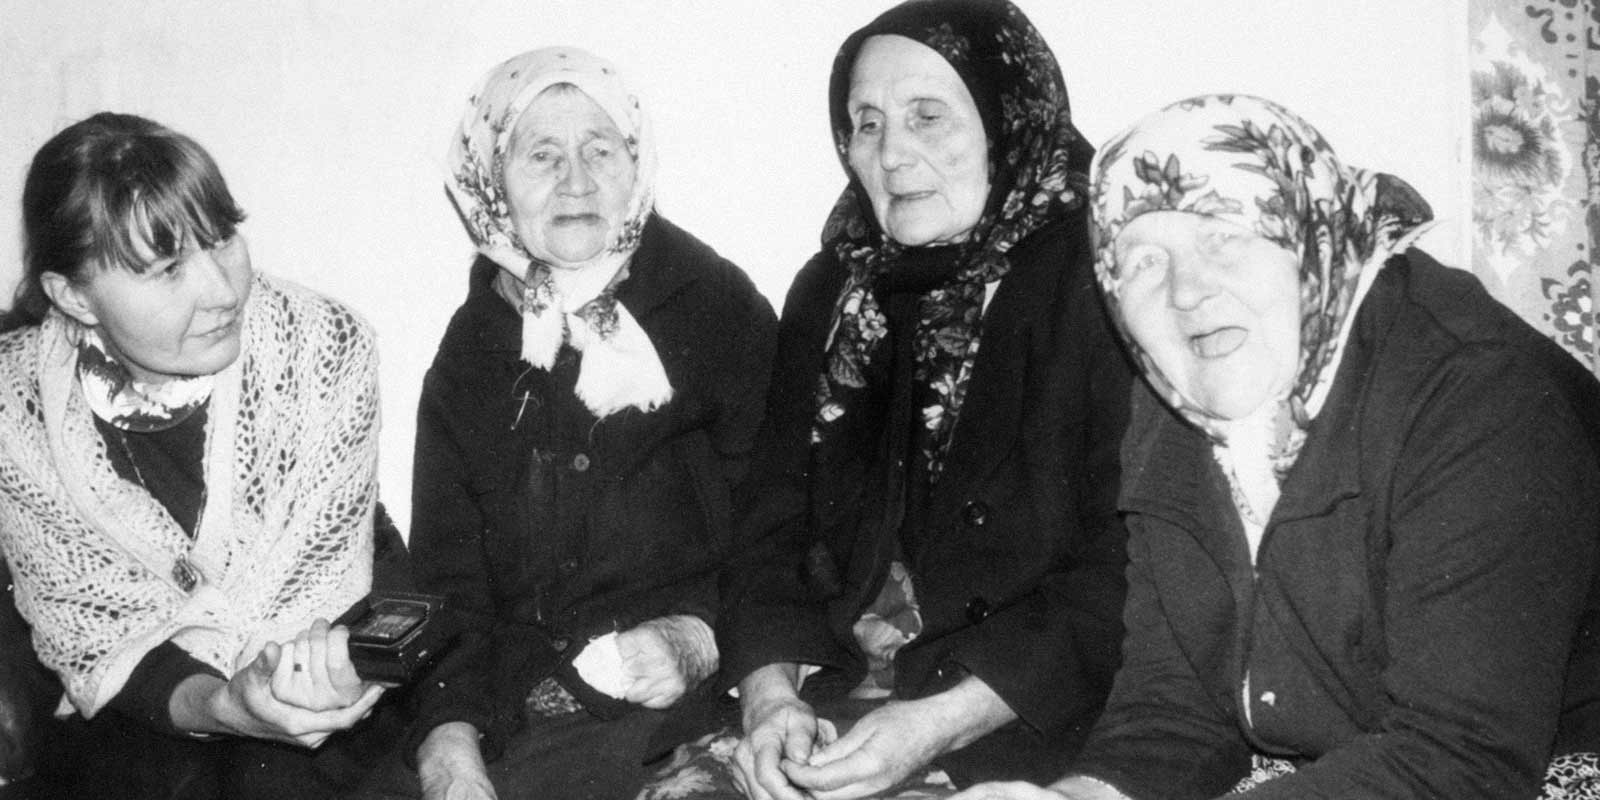 Celebration of “paabapraasnik”, the feast day exclusively for married women, in the Haidak village. Ethnologist Mare Piho, wife of Ivo Vasśo, Olga Freiland, Daria Kozlova. Photo by Arp Karm, 1991 (ERM).